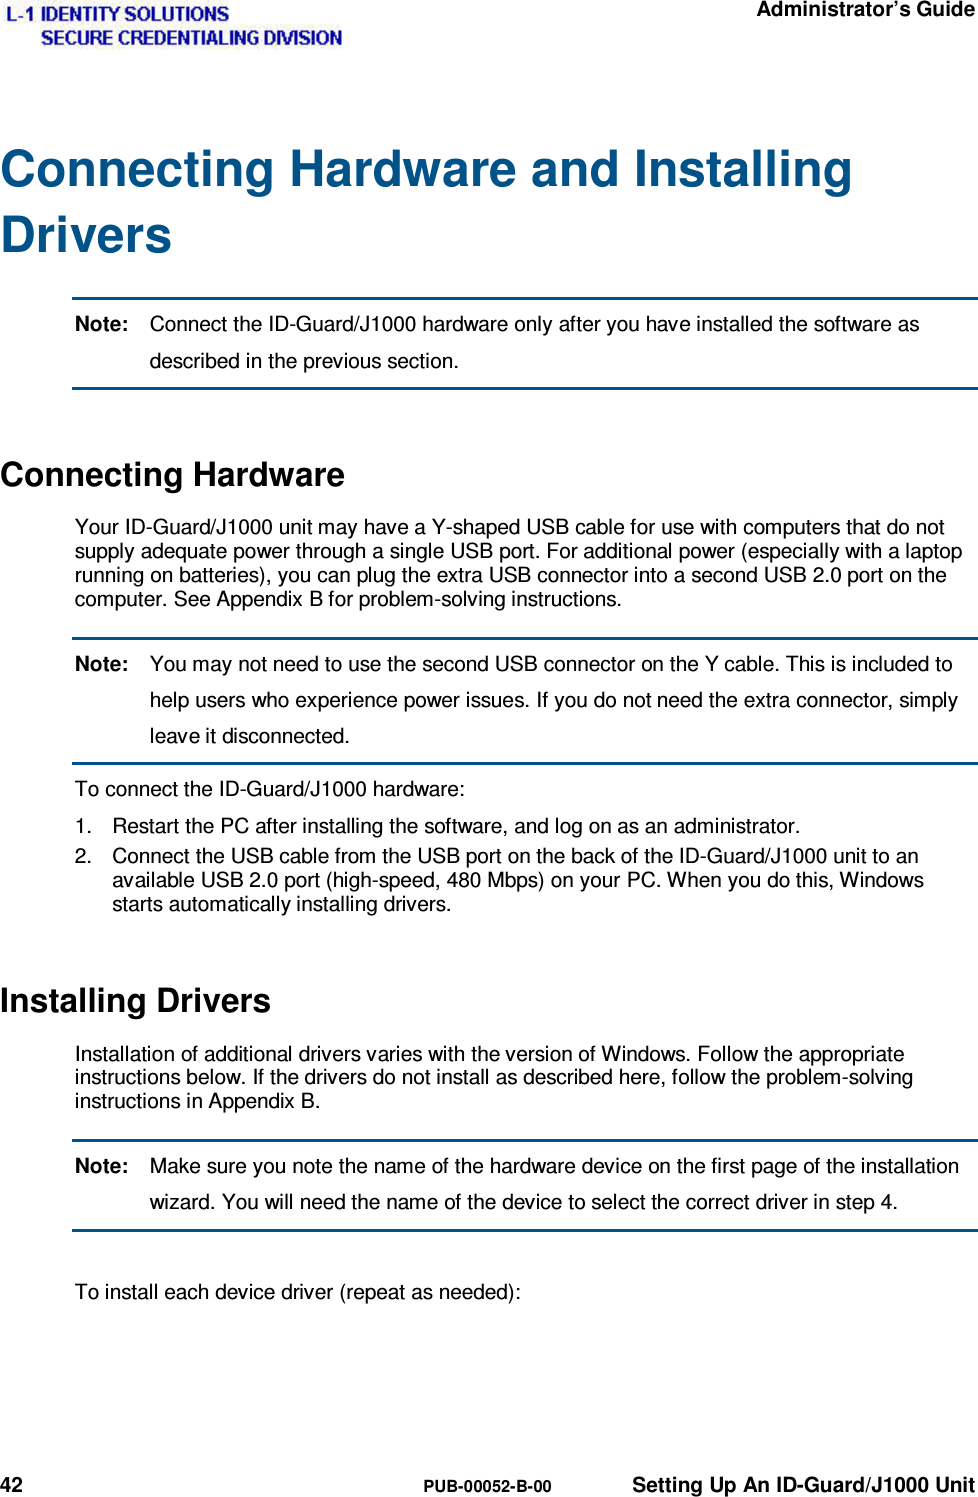   Administrator’s Guide 42  PUB-00052-B-00  Setting Up An ID-Guard/J1000 Unit Connecting Hardware and Installing Drivers Note:  Connect the ID-Guard/J1000 hardware only after you have installed the software as described in the previous section. Connecting Hardware Your ID-Guard/J1000 unit may have a Y-shaped USB cable for use with computers that do not supply adequate power through a single USB port. For additional power (especially with a laptop running on batteries), you can plug the extra USB connector into a second USB 2.0 port on the computer. See Appendix B for problem-solving instructions. Note:  You may not need to use the second USB connector on the Y cable. This is included to help users who experience power issues. If you do not need the extra connector, simply leave it disconnected. To connect the ID-Guard/J1000 hardware: 1.  Restart the PC after installing the software, and log on as an administrator. 2.  Connect the USB cable from the USB port on the back of the ID-Guard/J1000 unit to an available USB 2.0 port (high-speed, 480 Mbps) on your PC. When you do this, Windows starts automatically installing drivers. Installing Drivers Installation of additional drivers varies with the version of Windows. Follow the appropriate instructions below. If the drivers do not install as described here, follow the problem-solving instructions in Appendix B. Note:  Make sure you note the name of the hardware device on the first page of the installation wizard. You will need the name of the device to select the correct driver in step 4.  To install each device driver (repeat as needed): 